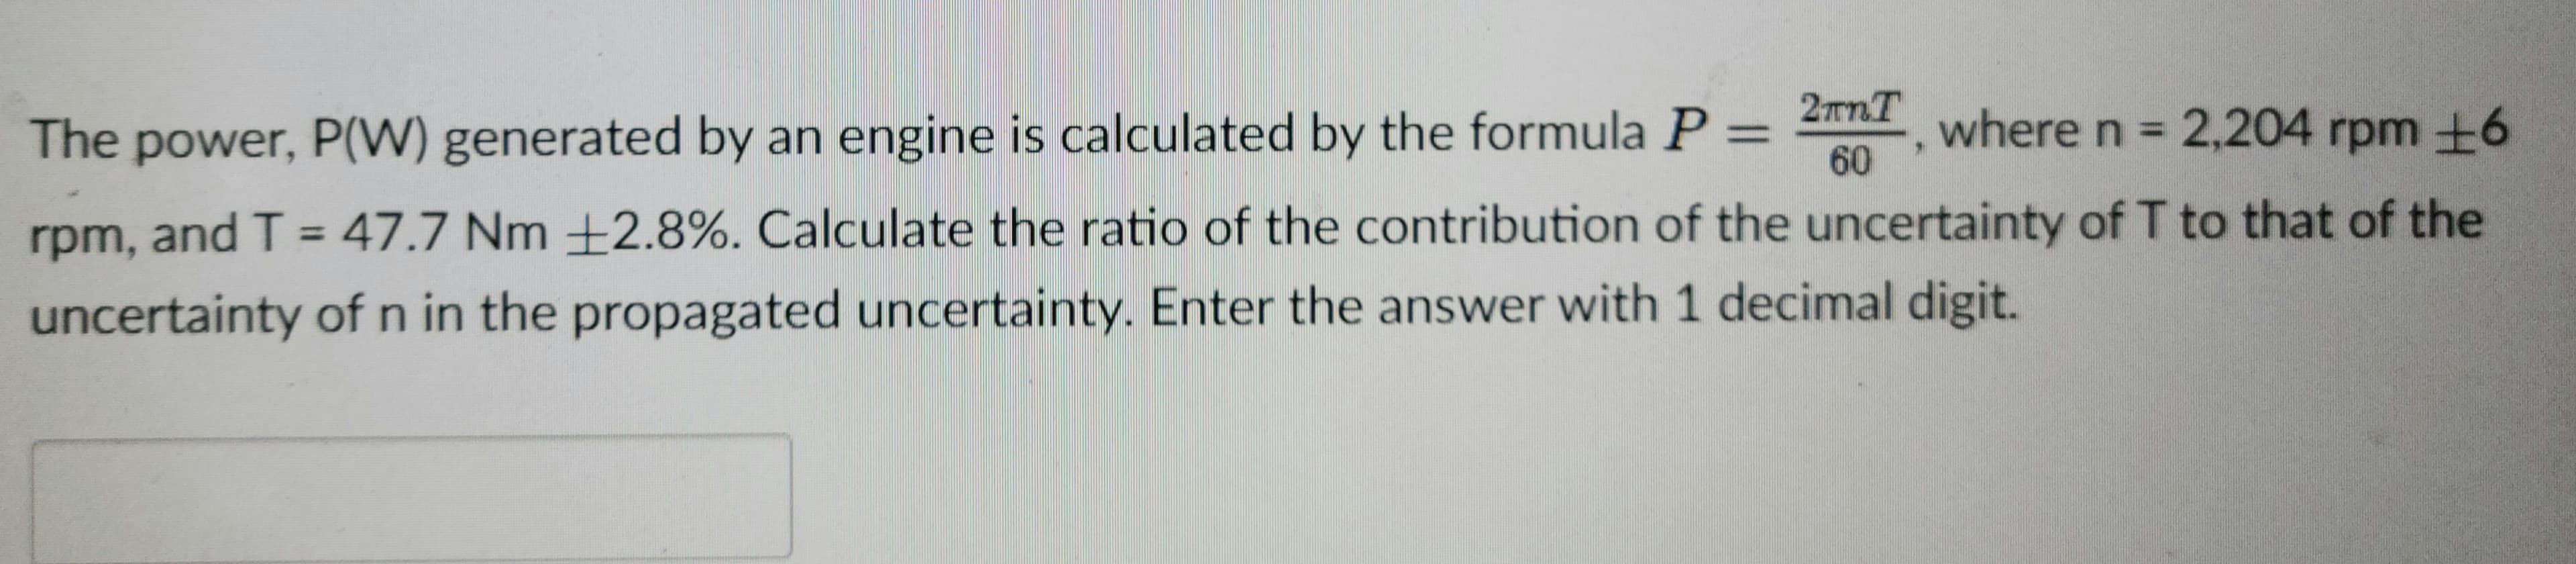 rpm, and T = 47.7 Nm +2.8%. Calculate the ratio of the contribution of the uncertainty of T to that of the
%3D
uncertainty of n in the propagated uncertainty. Enter the answer with 1 decimal digit.
